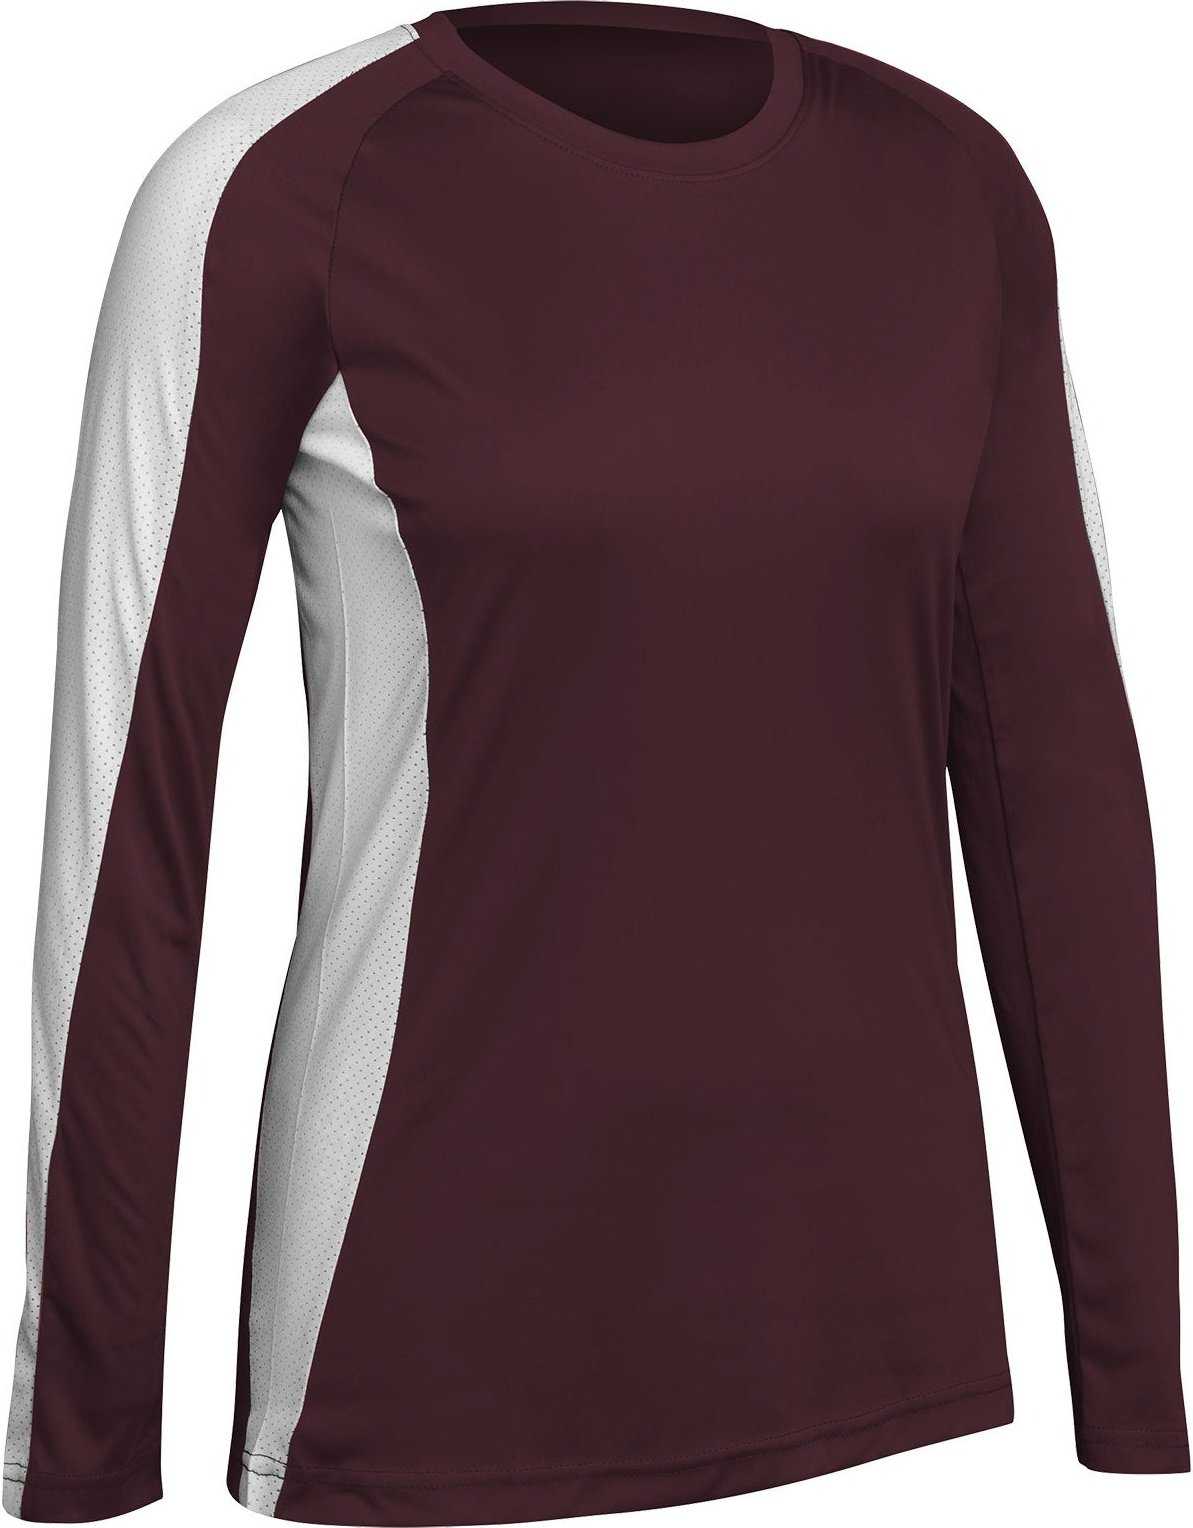 Champro VJ8 Triumphant Ladies Long Sleeve Volleyball Jersey - Maroon White - HIT a Double